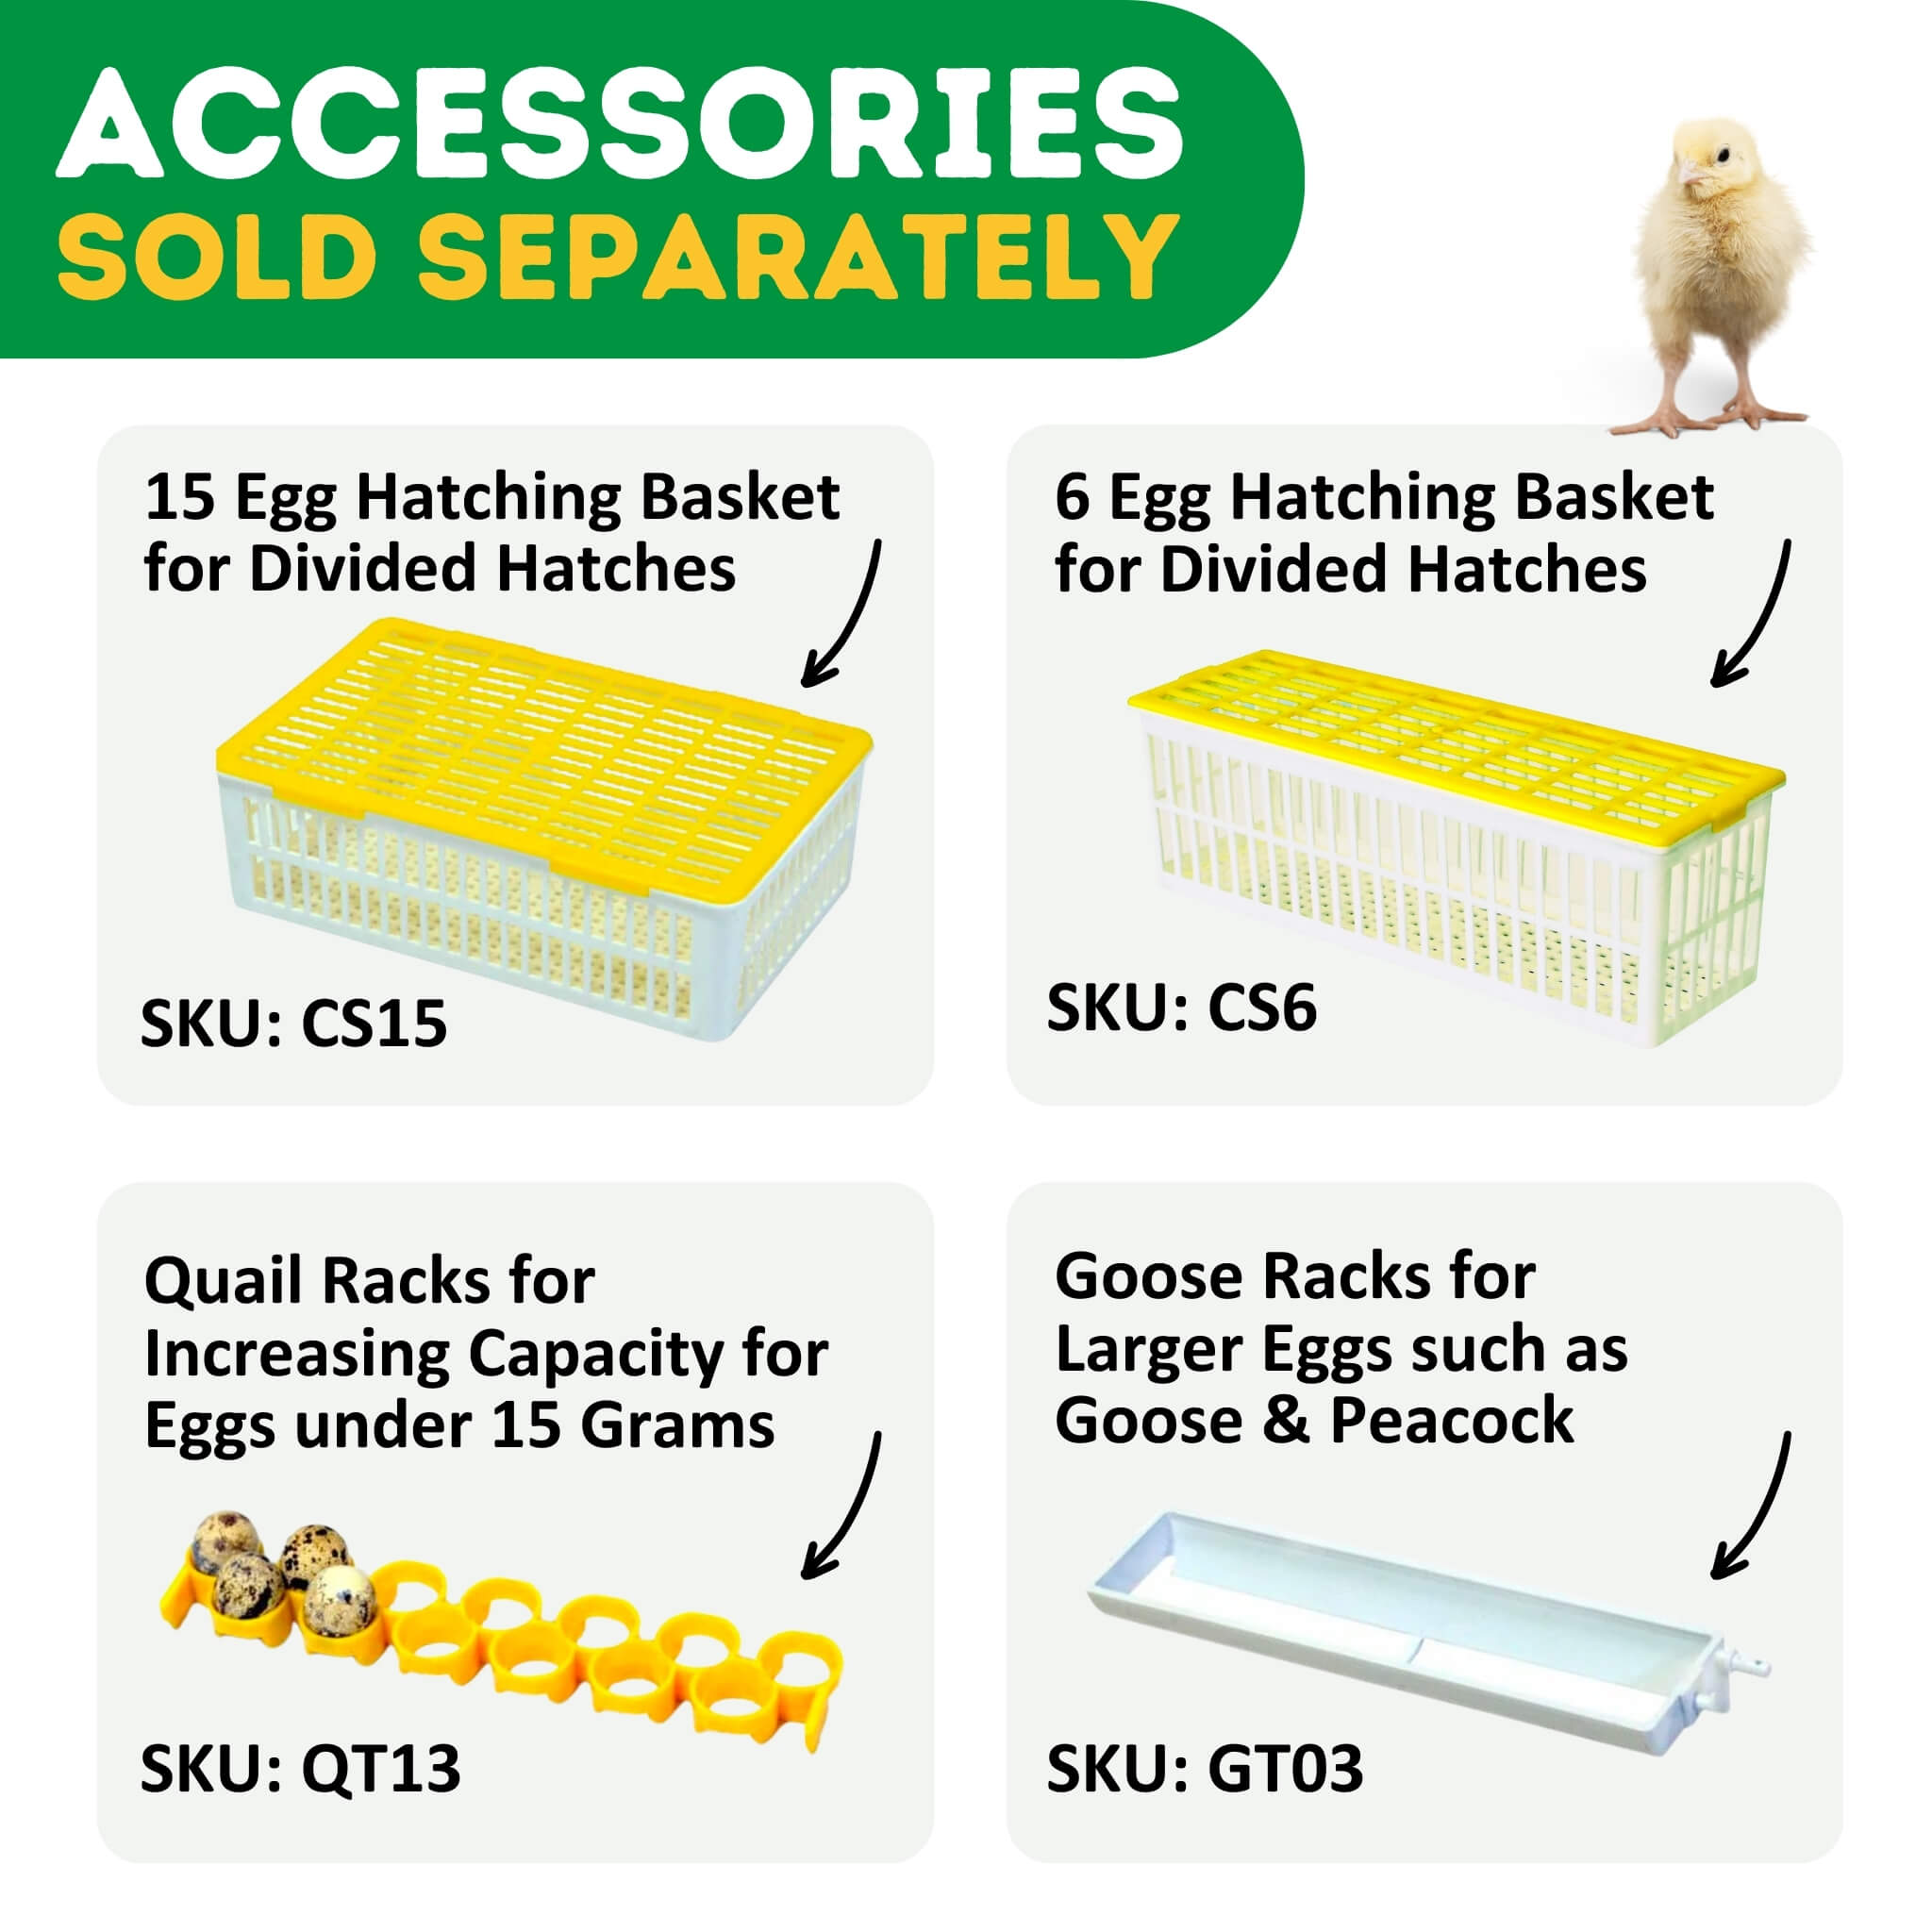 Hatching Time Cimuka CT Series incubators. Infographic shows 4 images of hatching baskets and racks. Text reads Accessories sold separately. Top left image shows 15 egg hatching basket for divided hatches. SKUCS15. Top right image shows 6 egg hatching basket for divided hatches CS6. Bottom left image shows Quail racks to increase capacity for eggs under 15 grams SKU QT13. Bottom right image shows Goose racks for larger eggs like Goose and Peacock SKU GT03.